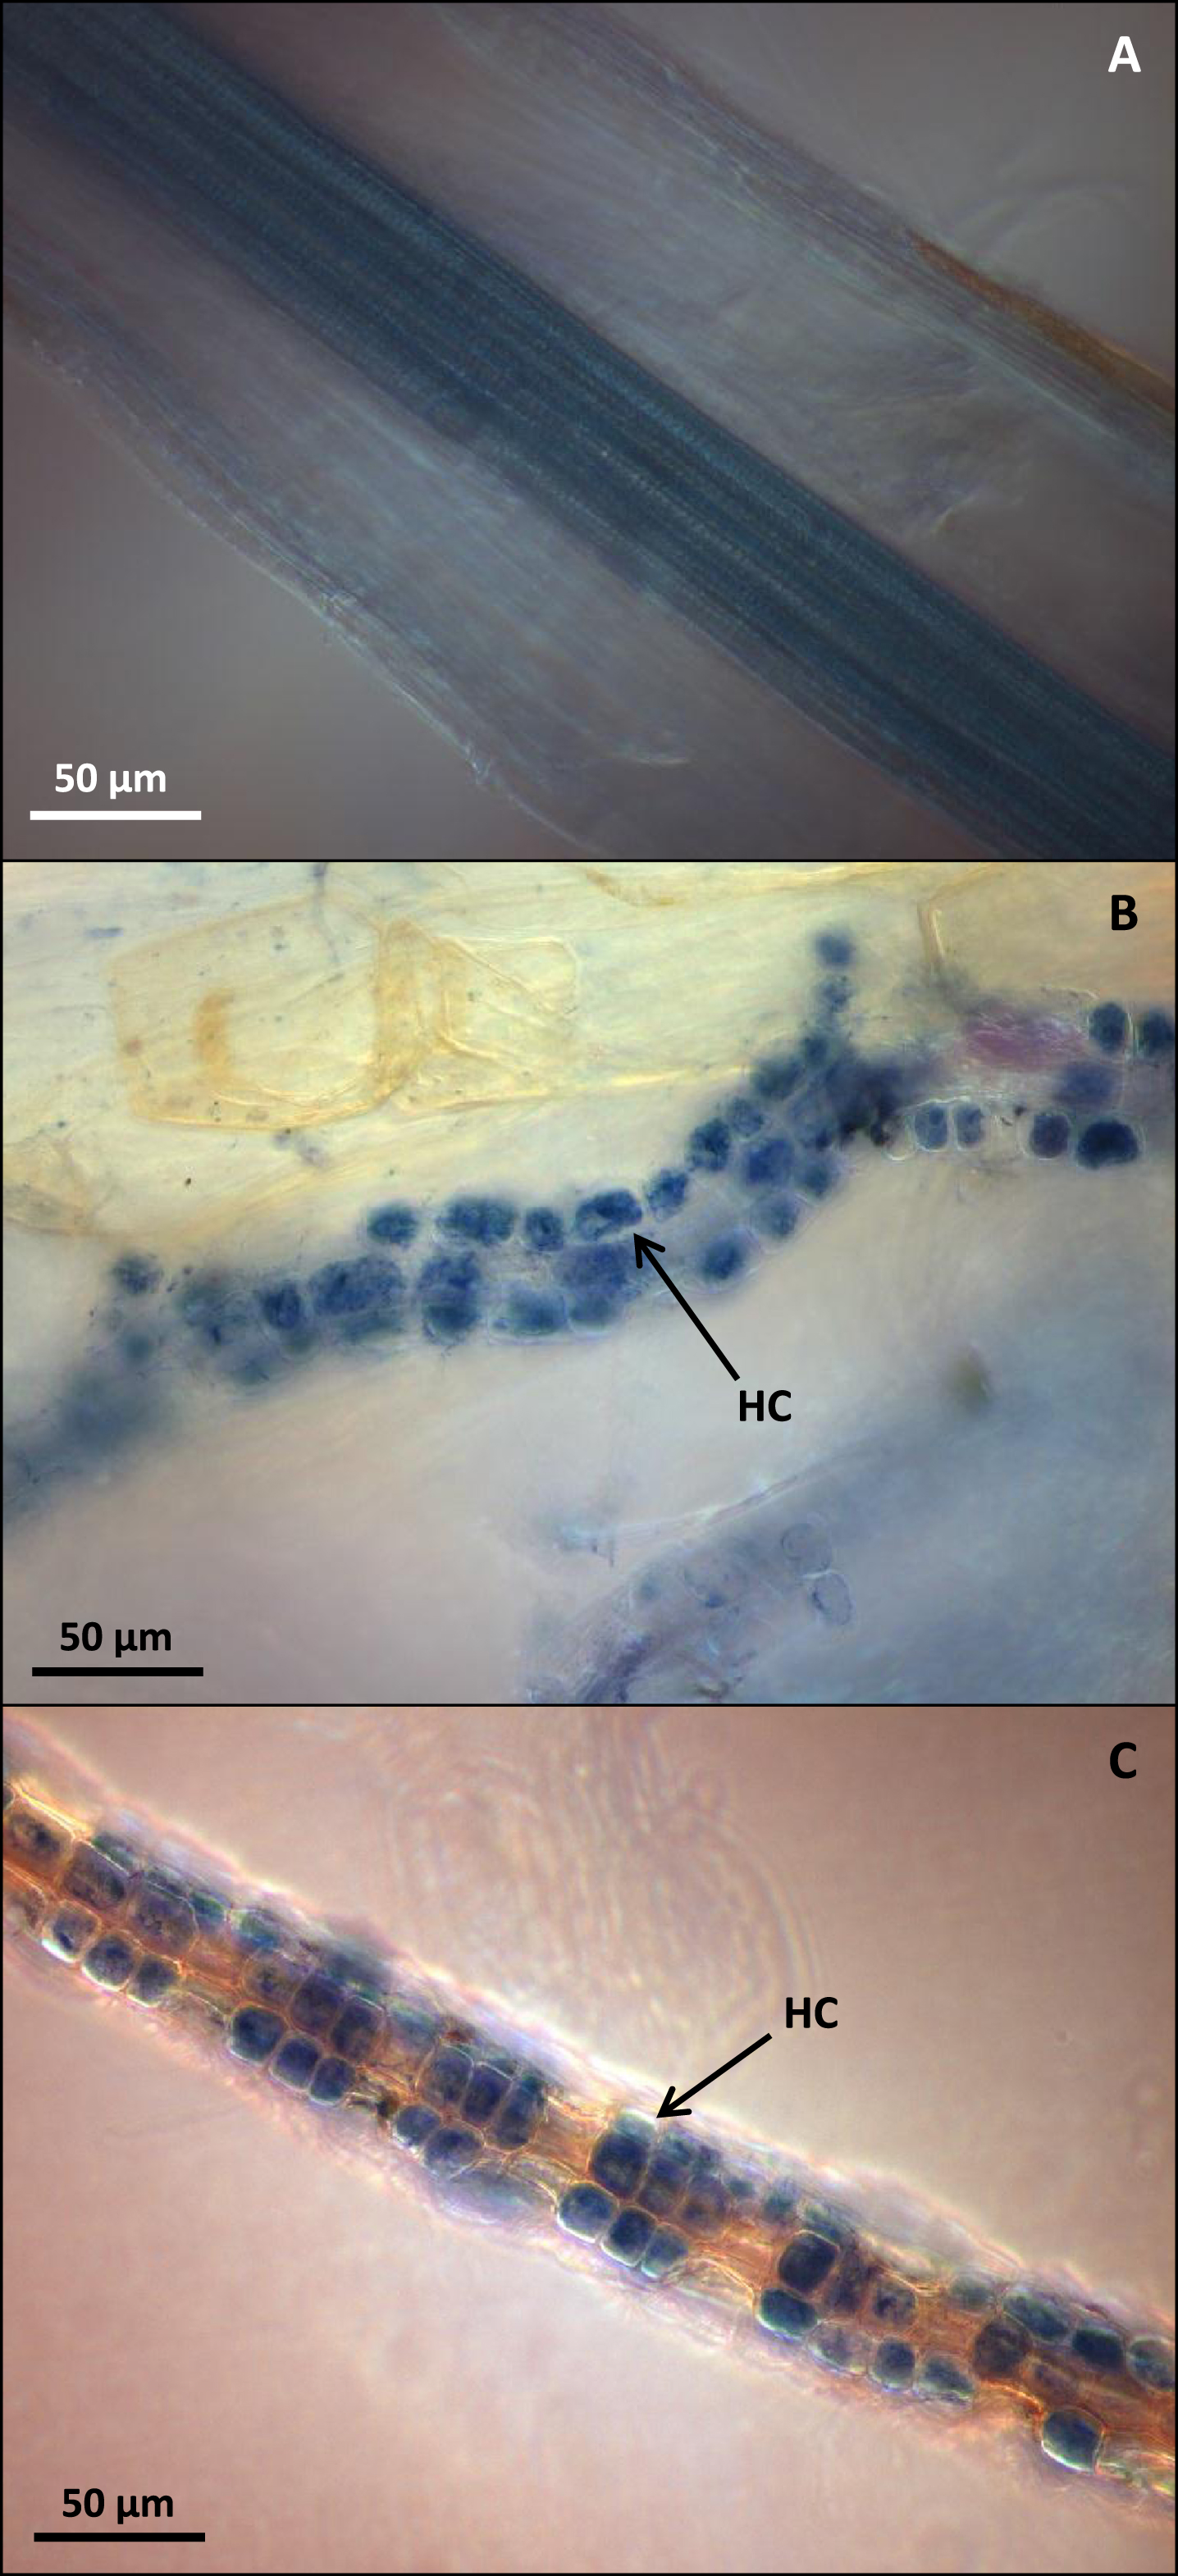 (A) C. vulgaris roots after KOH treatment and Trypan Blue staining resulting in total loss of root cortical cells. (B) Fresh C. vulgaris roots after staining in Trypan Blue for 10 minutes at room temperature and displaying intracellular hyphal coiling (HC). (C) Mycorrhizal C. vulgaris roots after freezing at –20 °C and staining with Trypan Blue and displaying intracellular hyphal coiling (HC). Bar = 50μm.